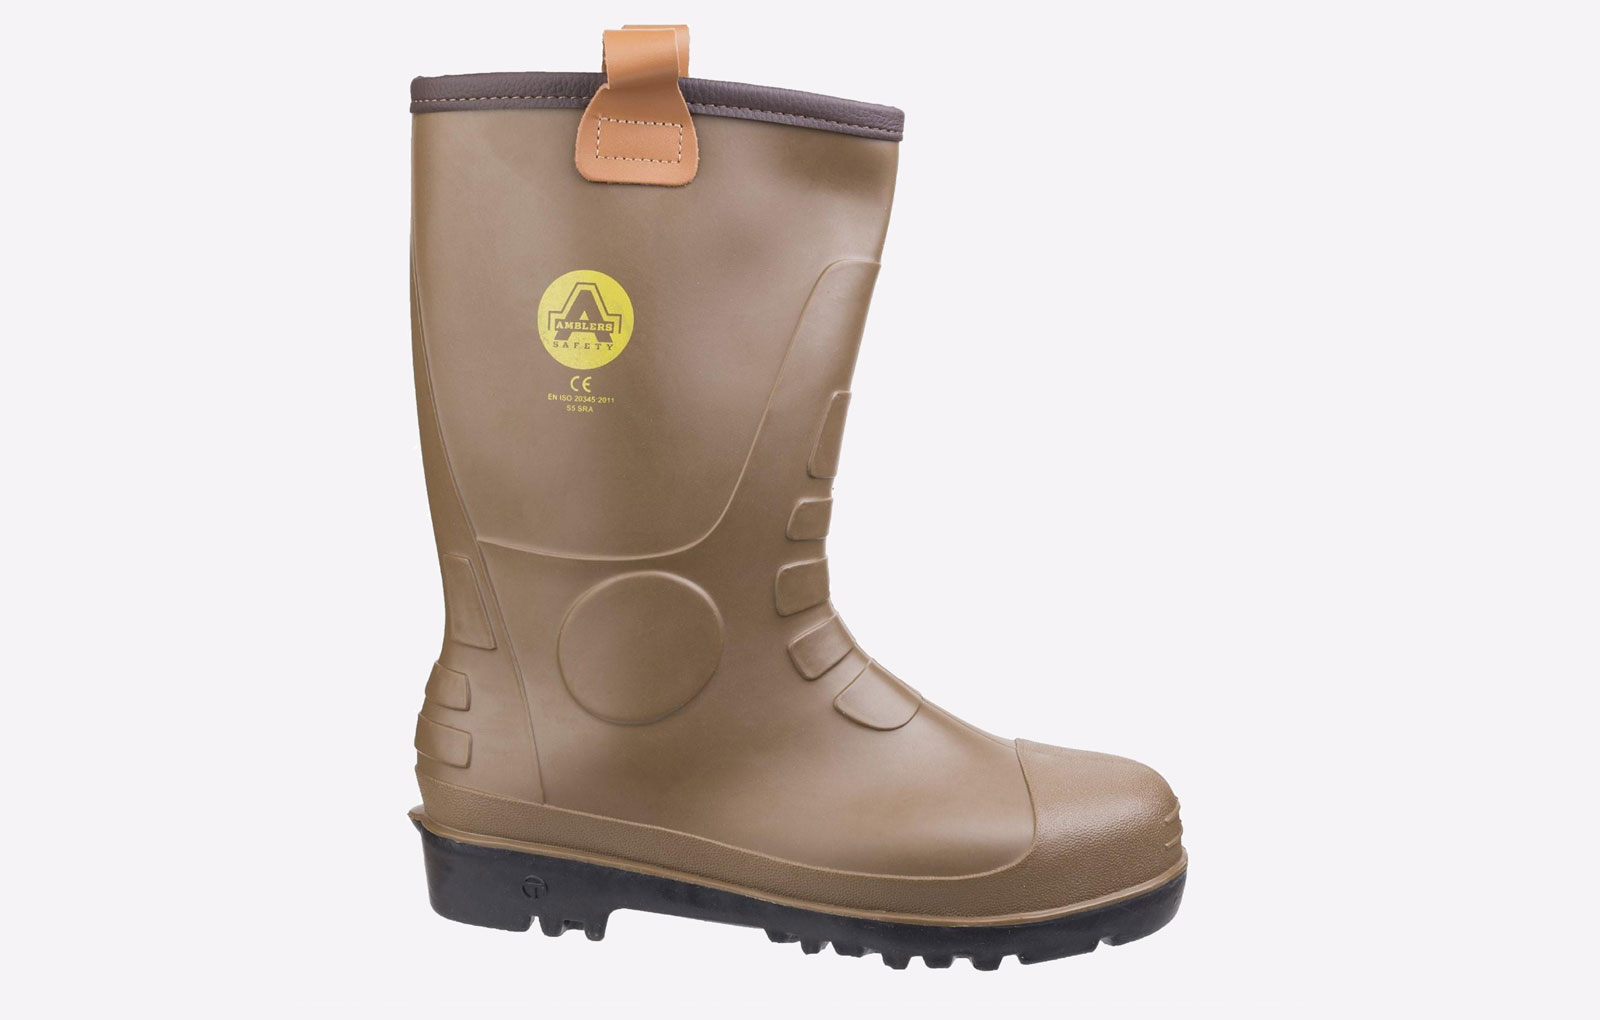 Amblers Safety FS95 WATERPROOF Rigger Boot - GRD-21153-33823-10